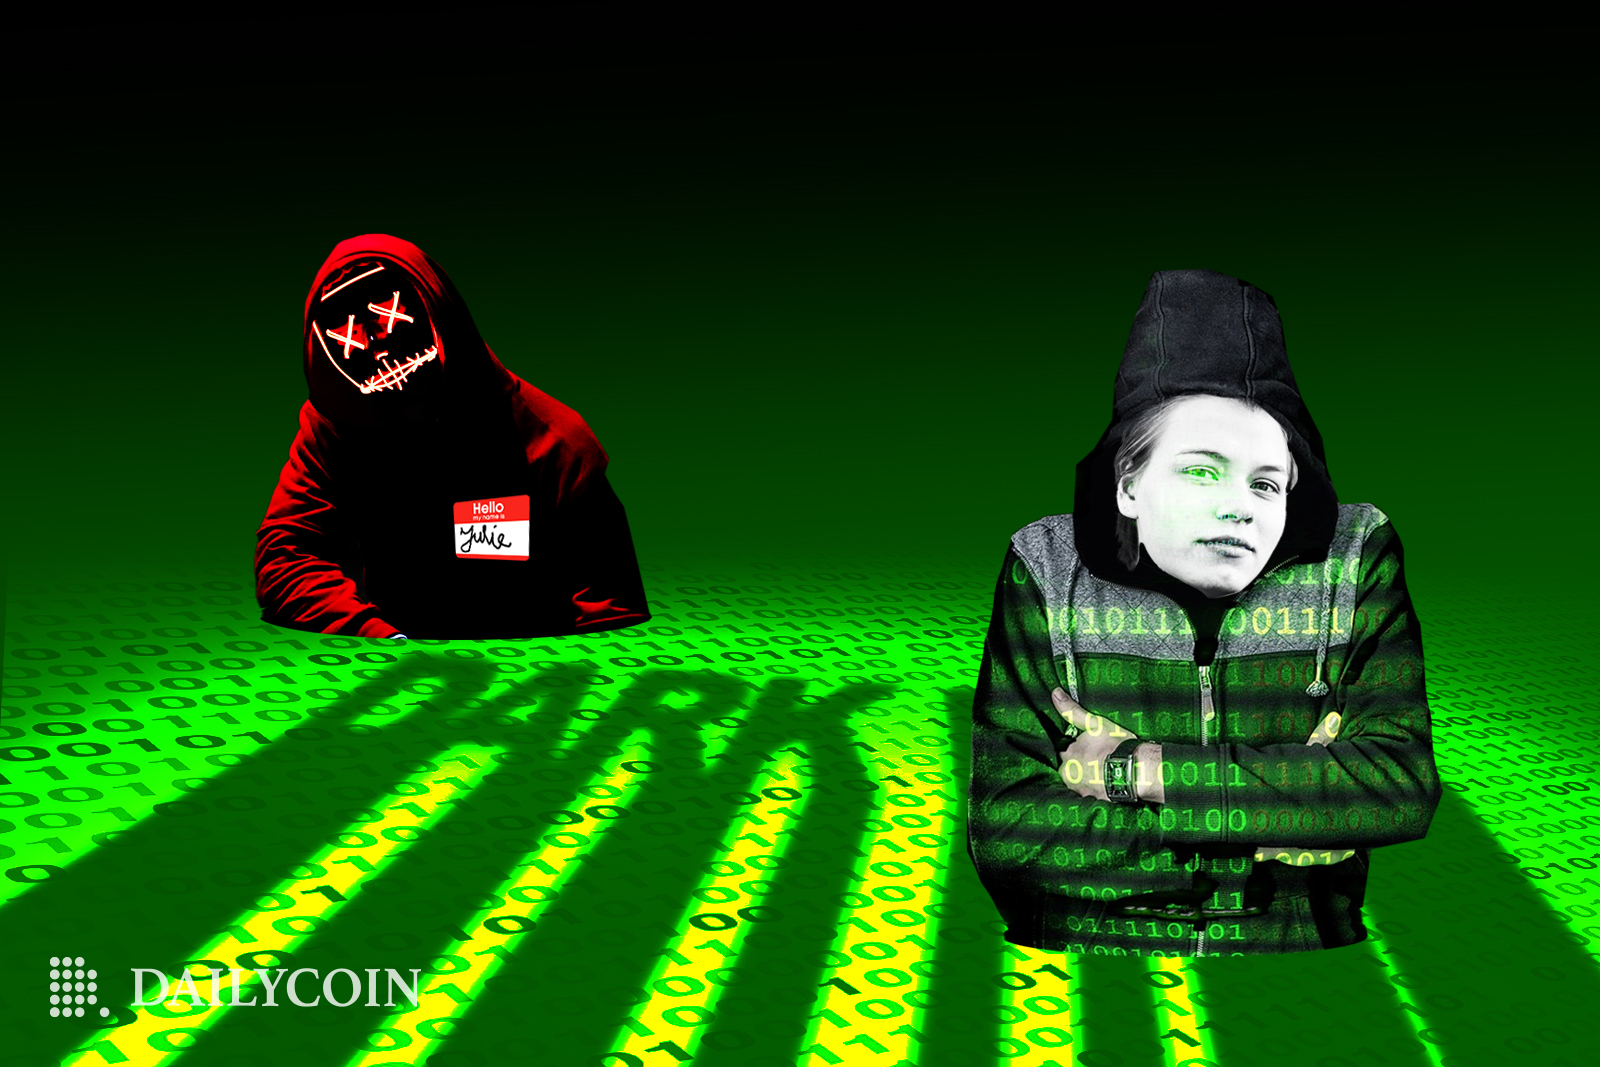 Two humans with green and red hoodies on a green background with Dark Web written on it